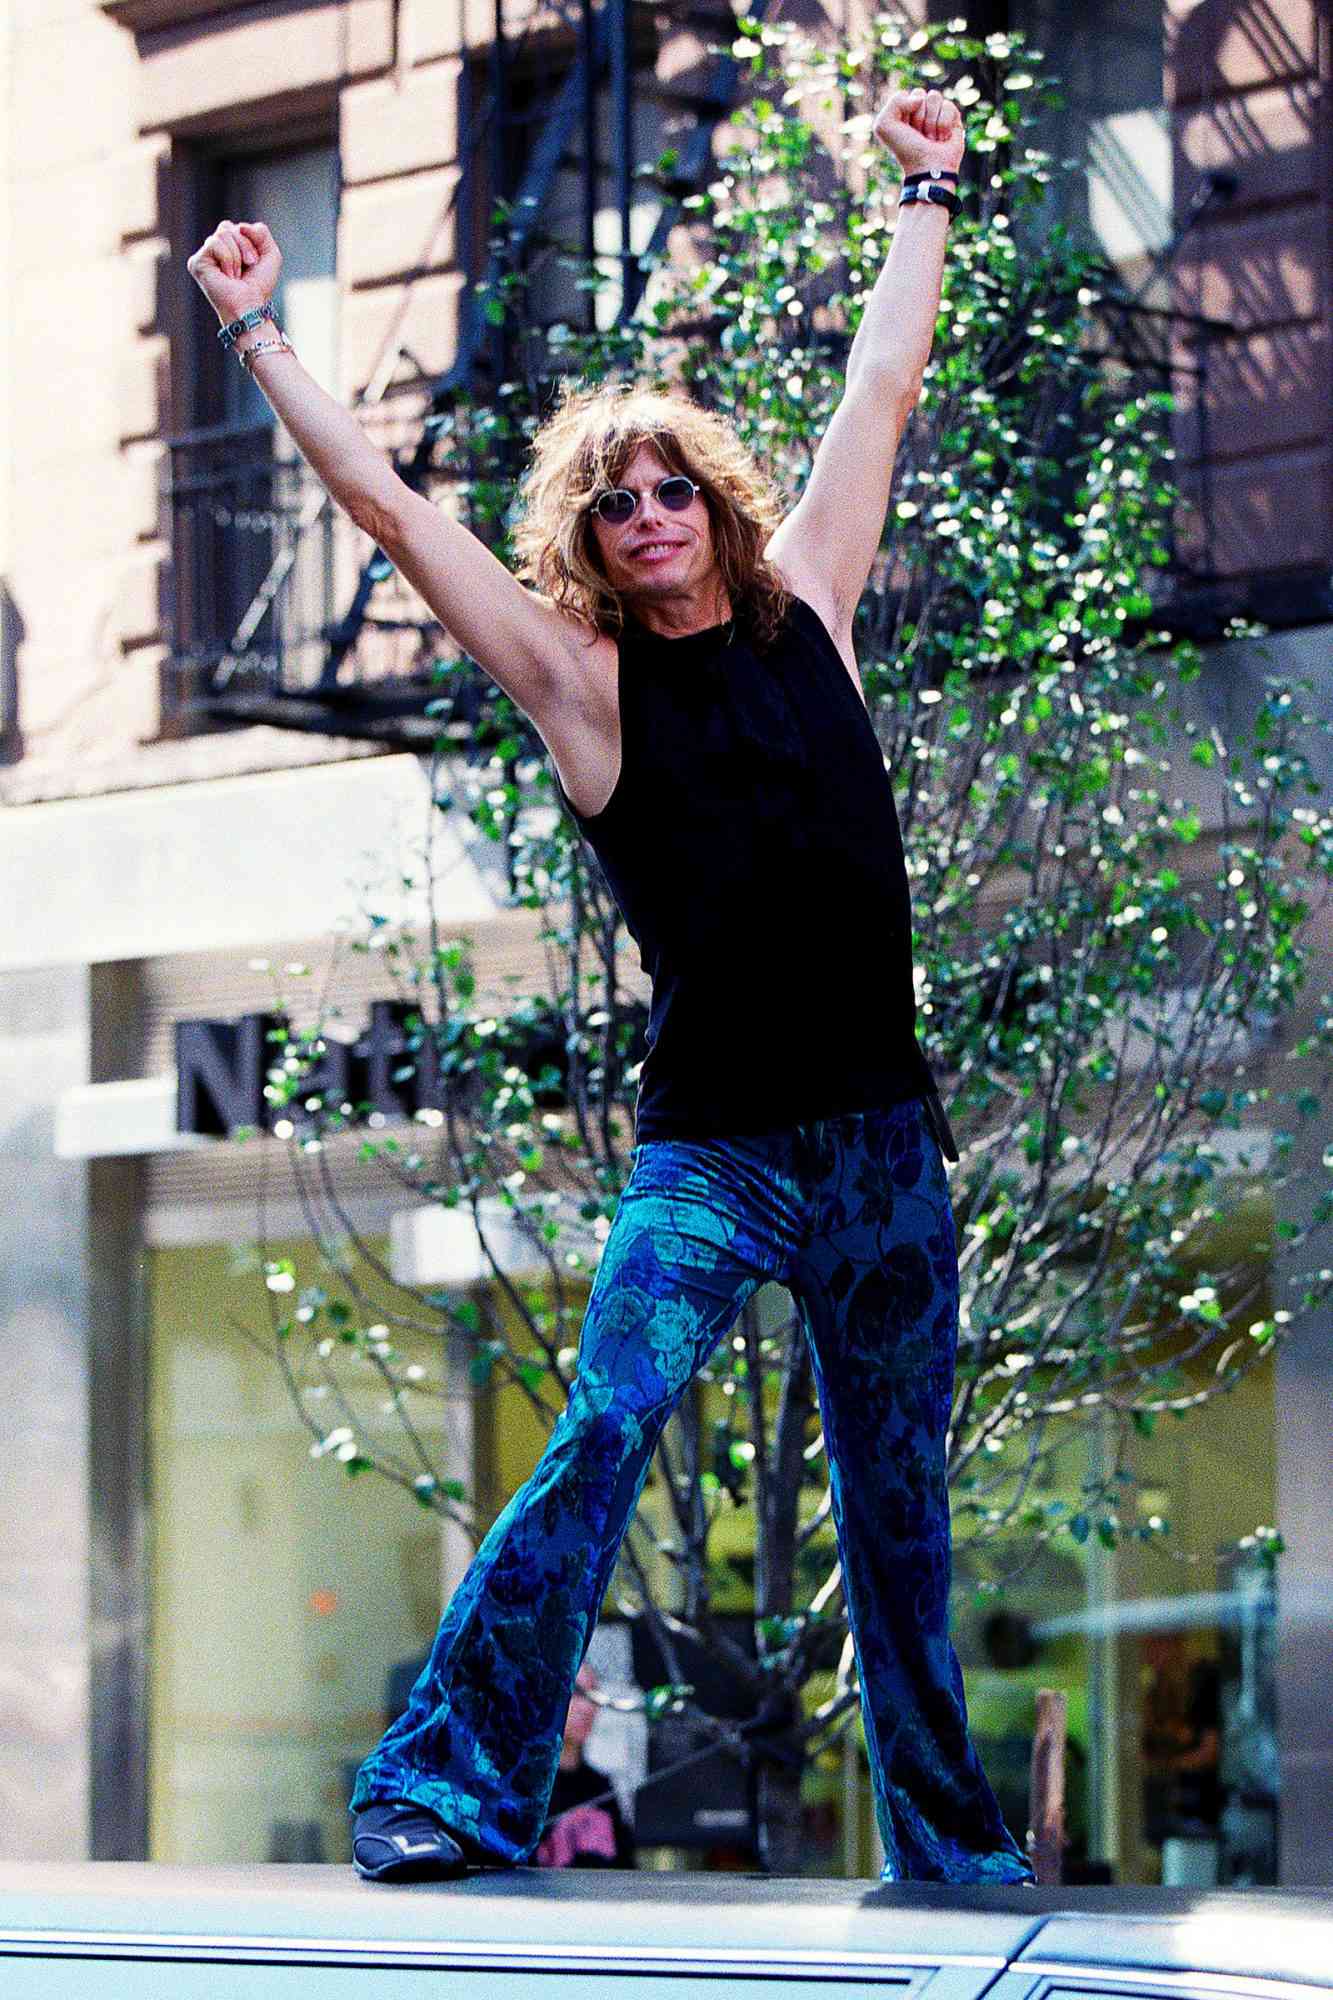 Steven Tyler, lead singer of Aerosmith, rock band, stood on top of his limousine in midtown Manhattan on September 20, 2000 in NYC